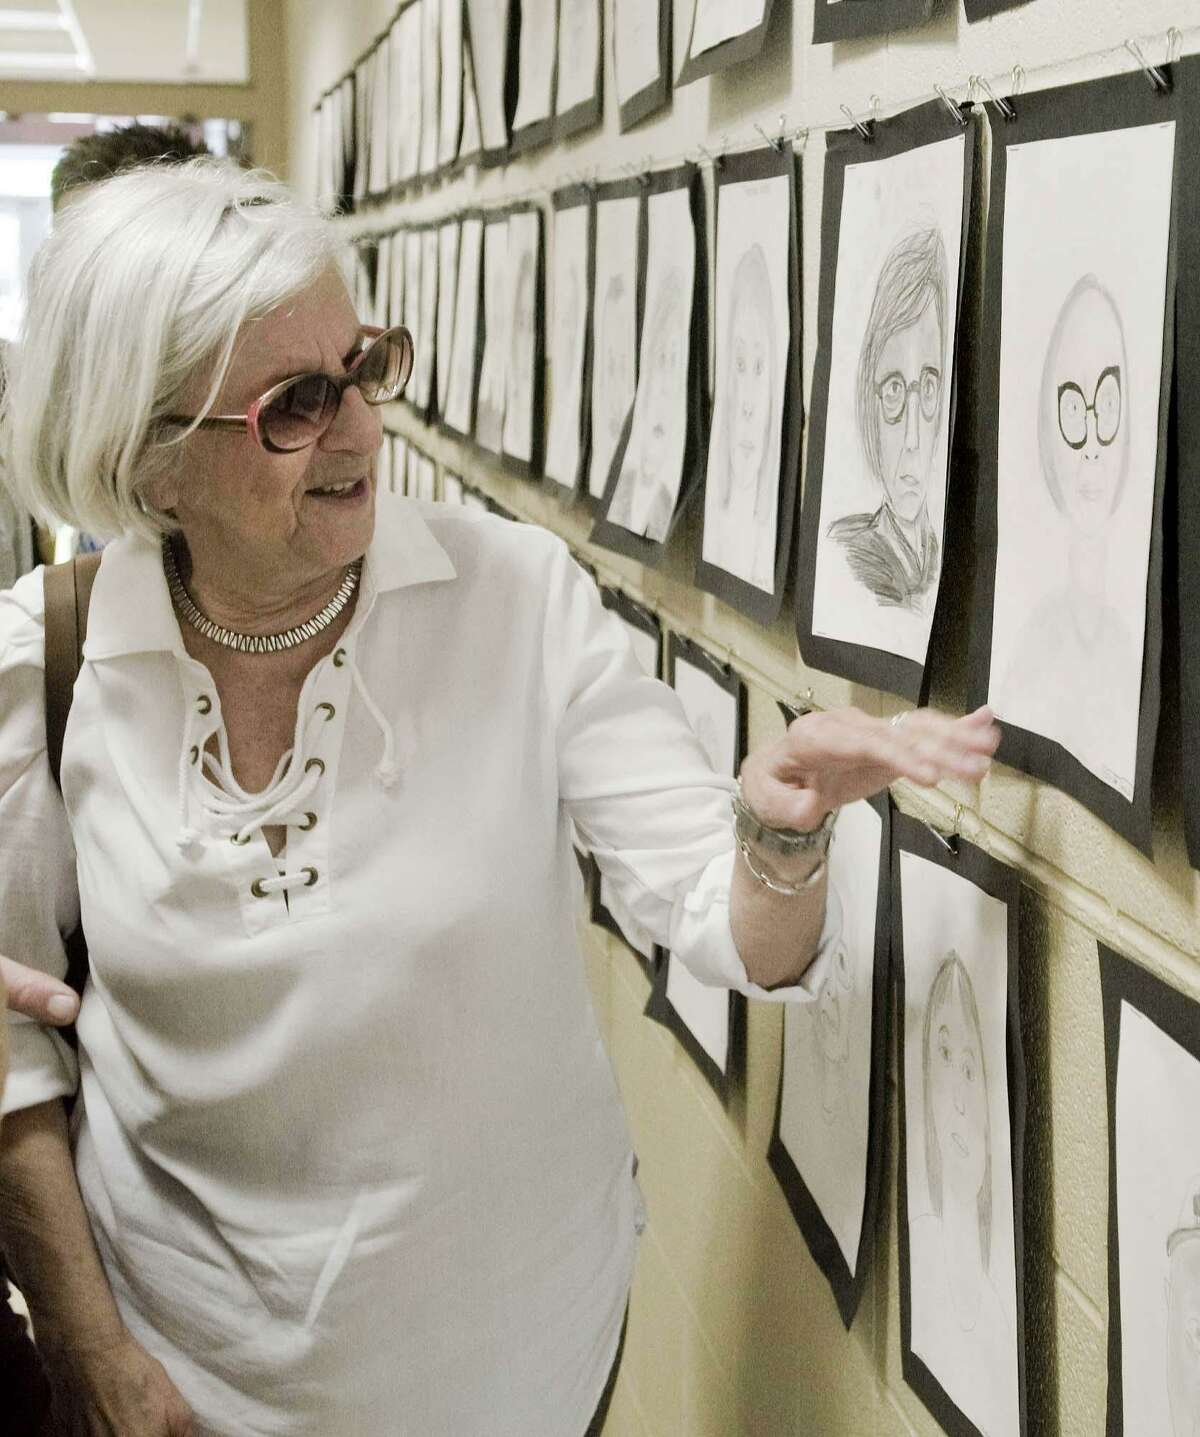 Founders Hall member Clotilde Farrell looks at her portrait drawn by a Scotts Ridge Middle School seventh-grader. Portraits are displayed on the school hallway walls. Wednesday, May 30, 2018